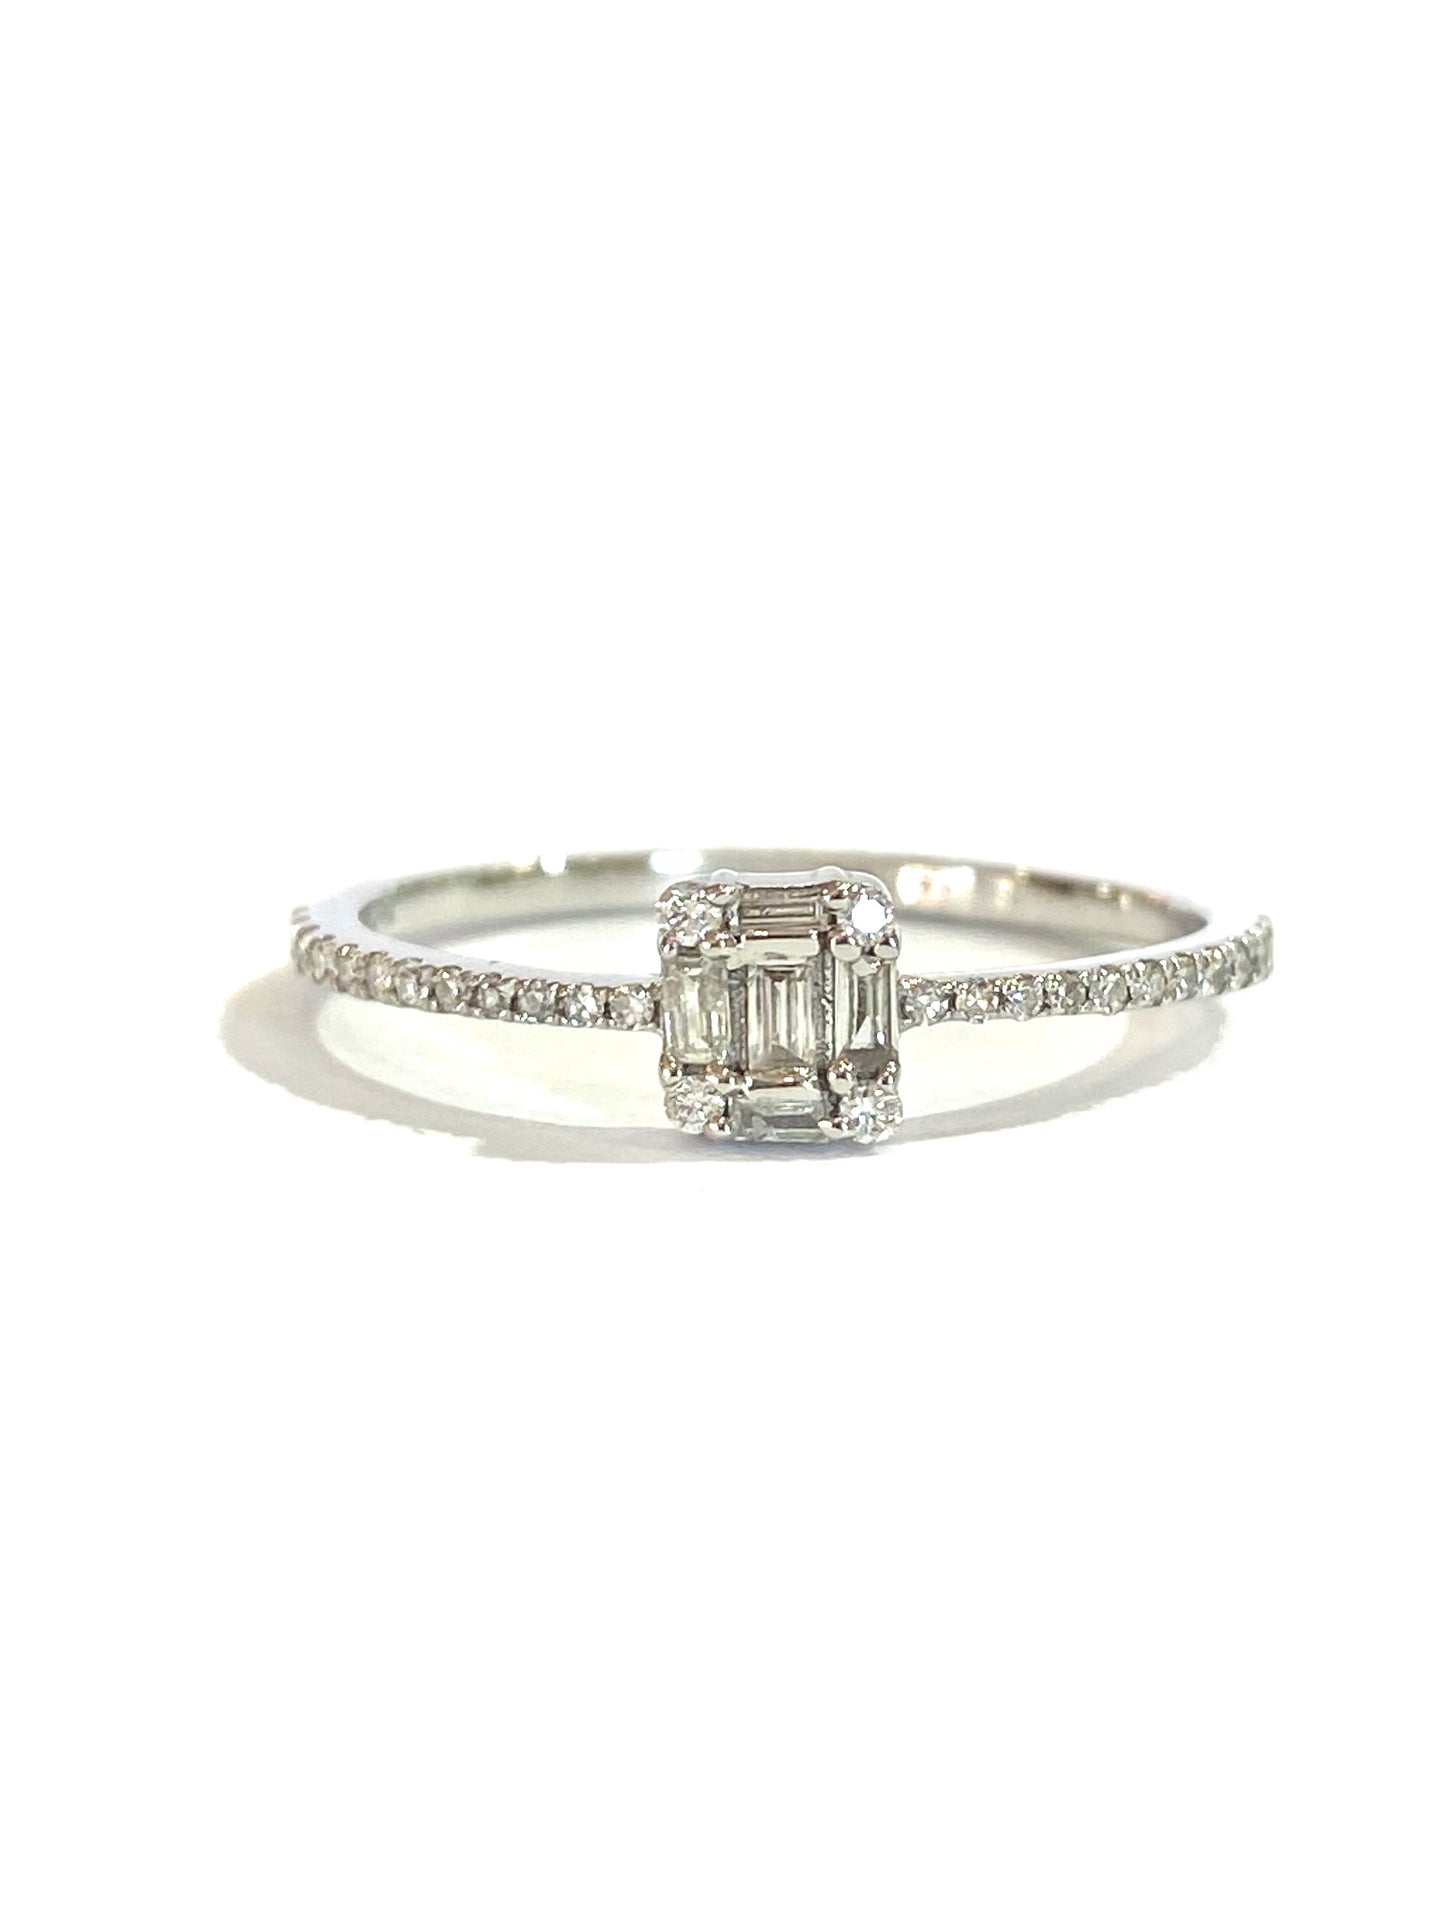 Thin Diamond Ring with Square Cluster of Baguettes